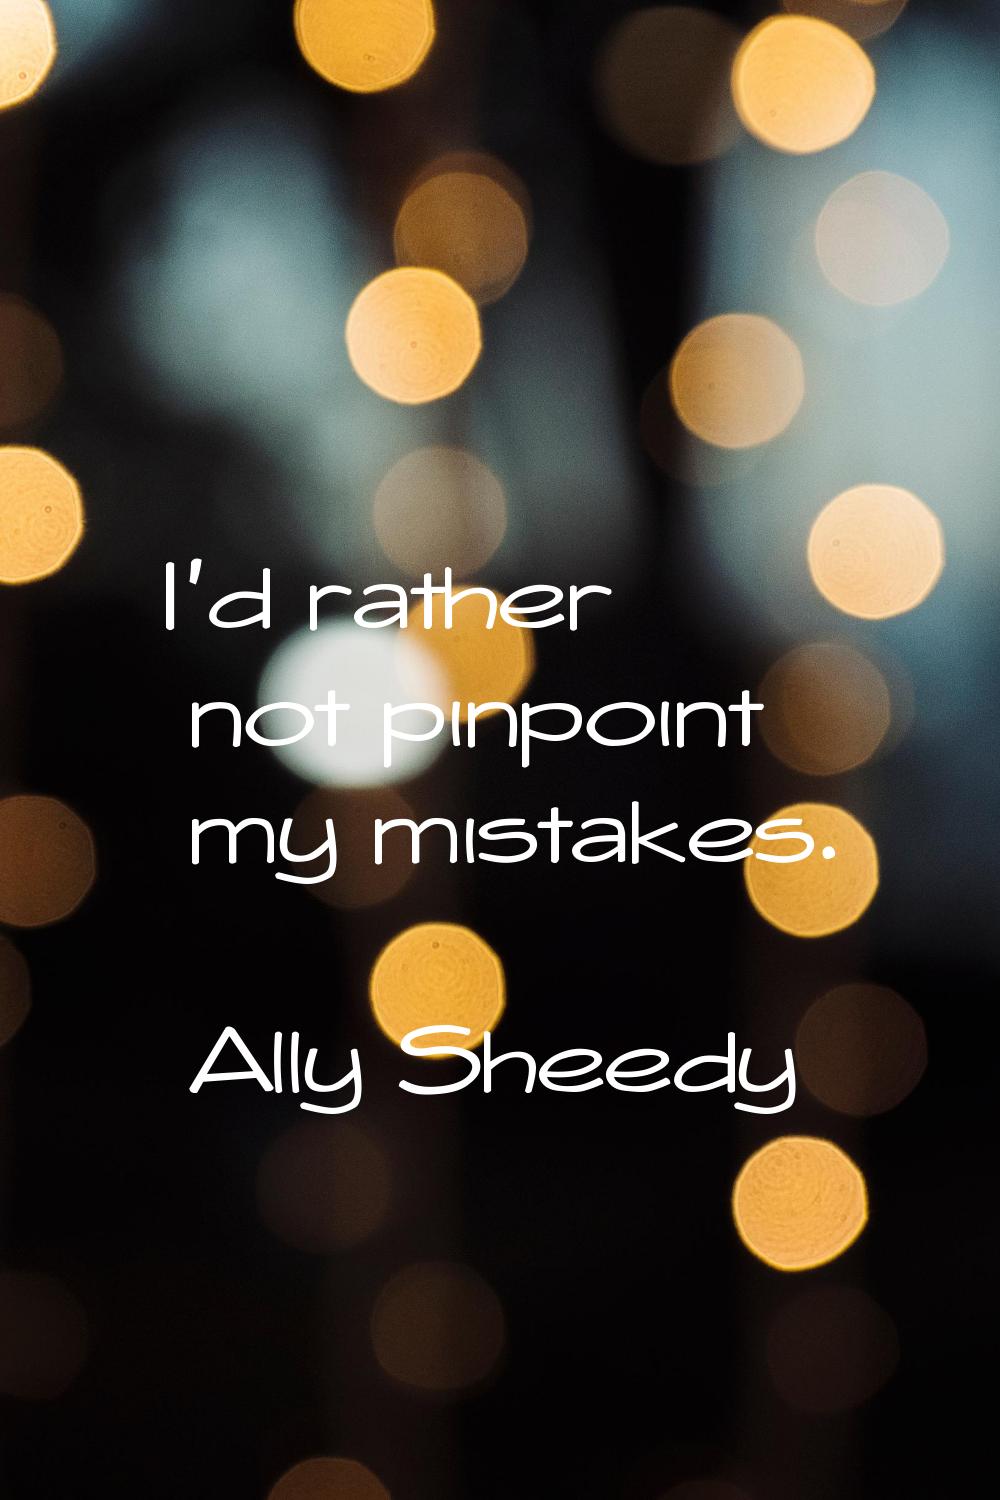 I'd rather not pinpoint my mistakes.